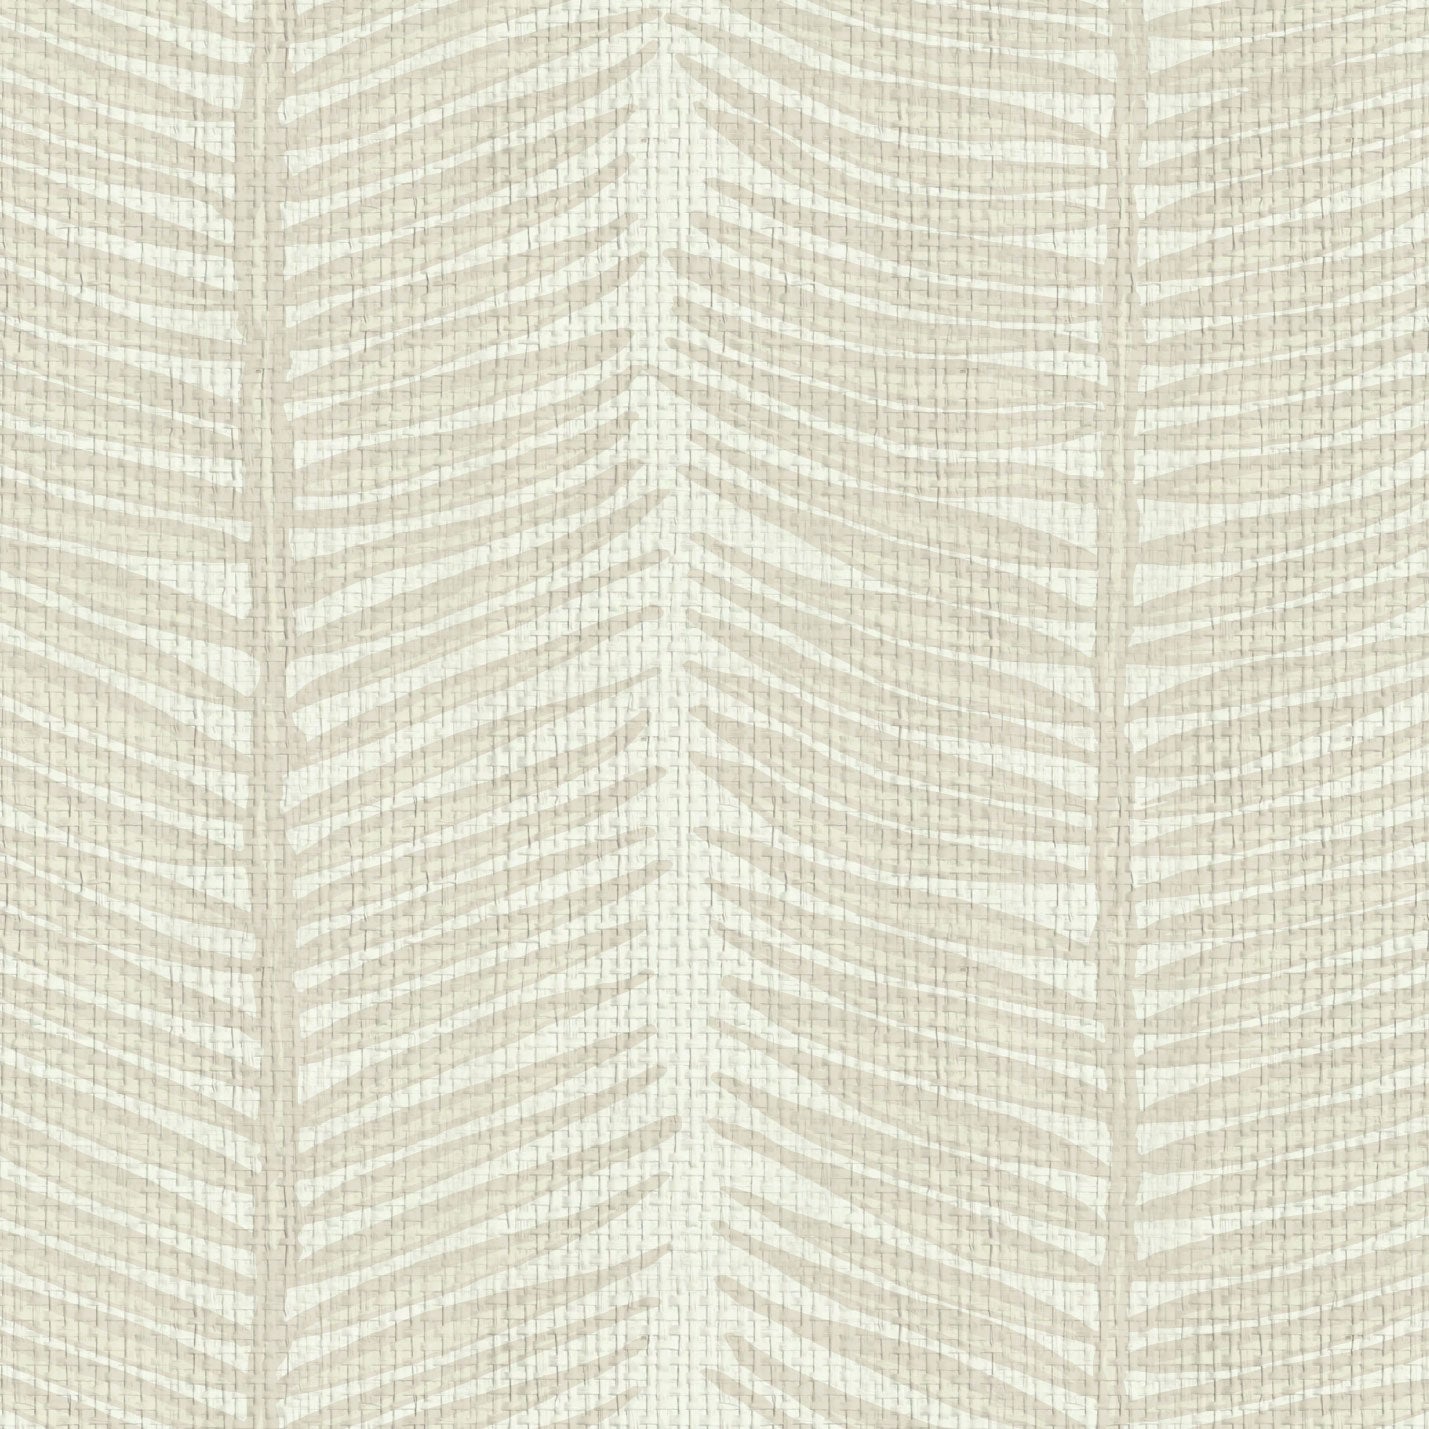 paper weave wallpaper Natural Textured Eco-Friendly Non-toxic High-quality Sustainable Interior Design Bold Custom Tailor-made Retro chic Tropical Jungle Coastal Garden Seaside Seashore Waterfront Vacation home styling Retreat Relaxed beach vibes Beach cottage Shoreline Oceanfront Nautical Cabana preppy palm fern leaf vertical stripe neutral tonal tan sand beige off-white white taupe